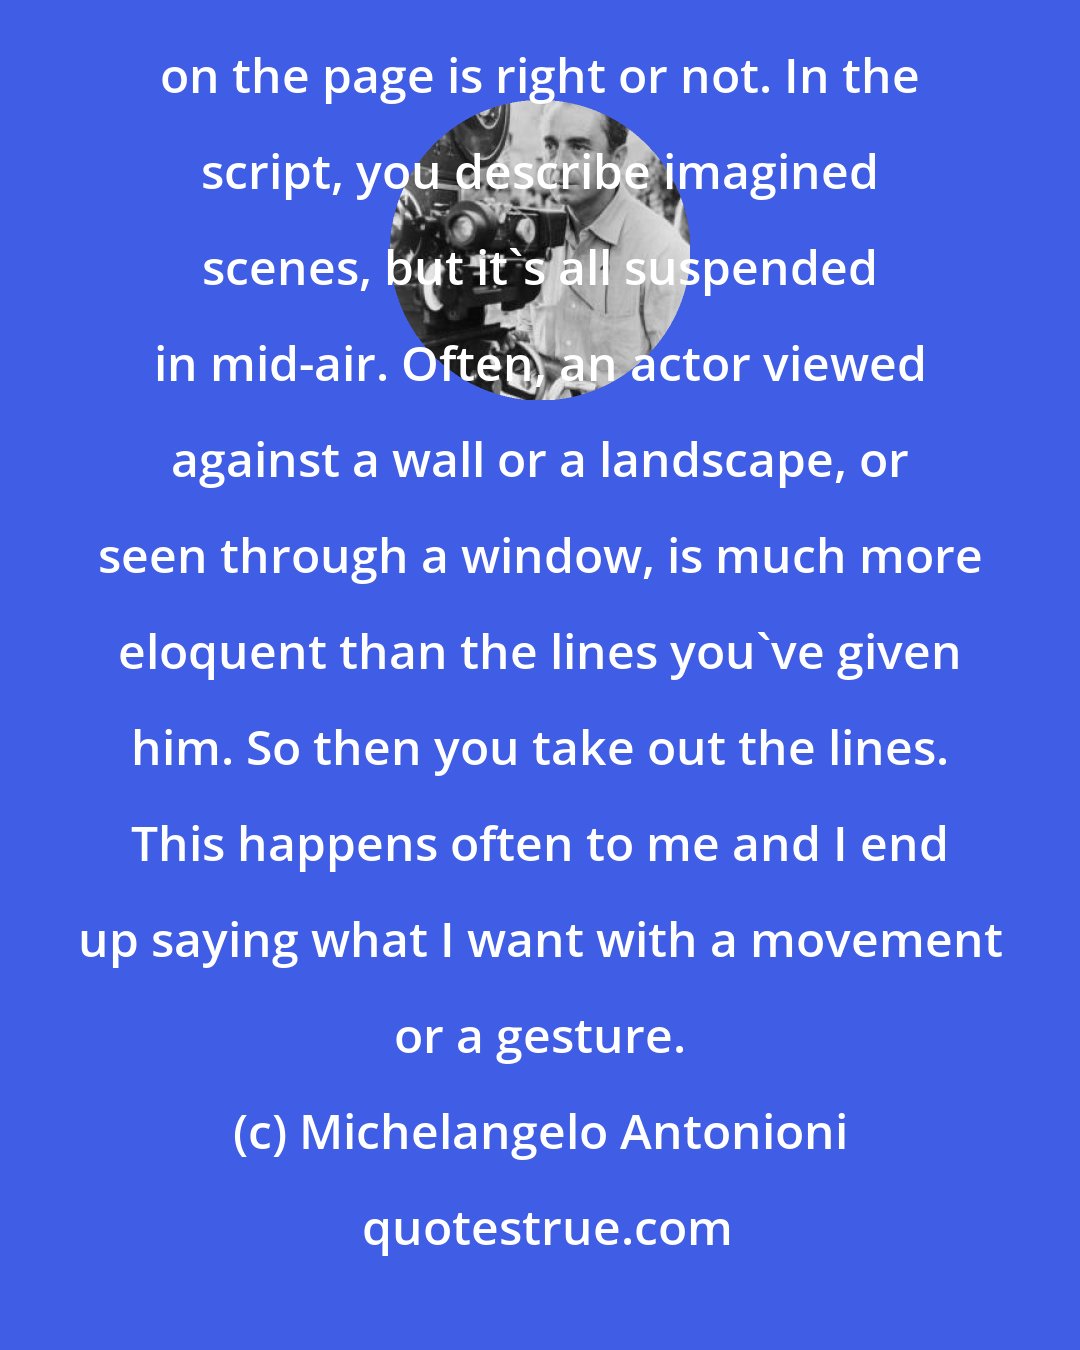 Michelangelo Antonioni: The script is a starting point, not a fixed highway. I must look through the camera to see if what I've written on the page is right or not. In the script, you describe imagined scenes, but it's all suspended in mid-air. Often, an actor viewed against a wall or a landscape, or seen through a window, is much more eloquent than the lines you've given him. So then you take out the lines. This happens often to me and I end up saying what I want with a movement or a gesture.